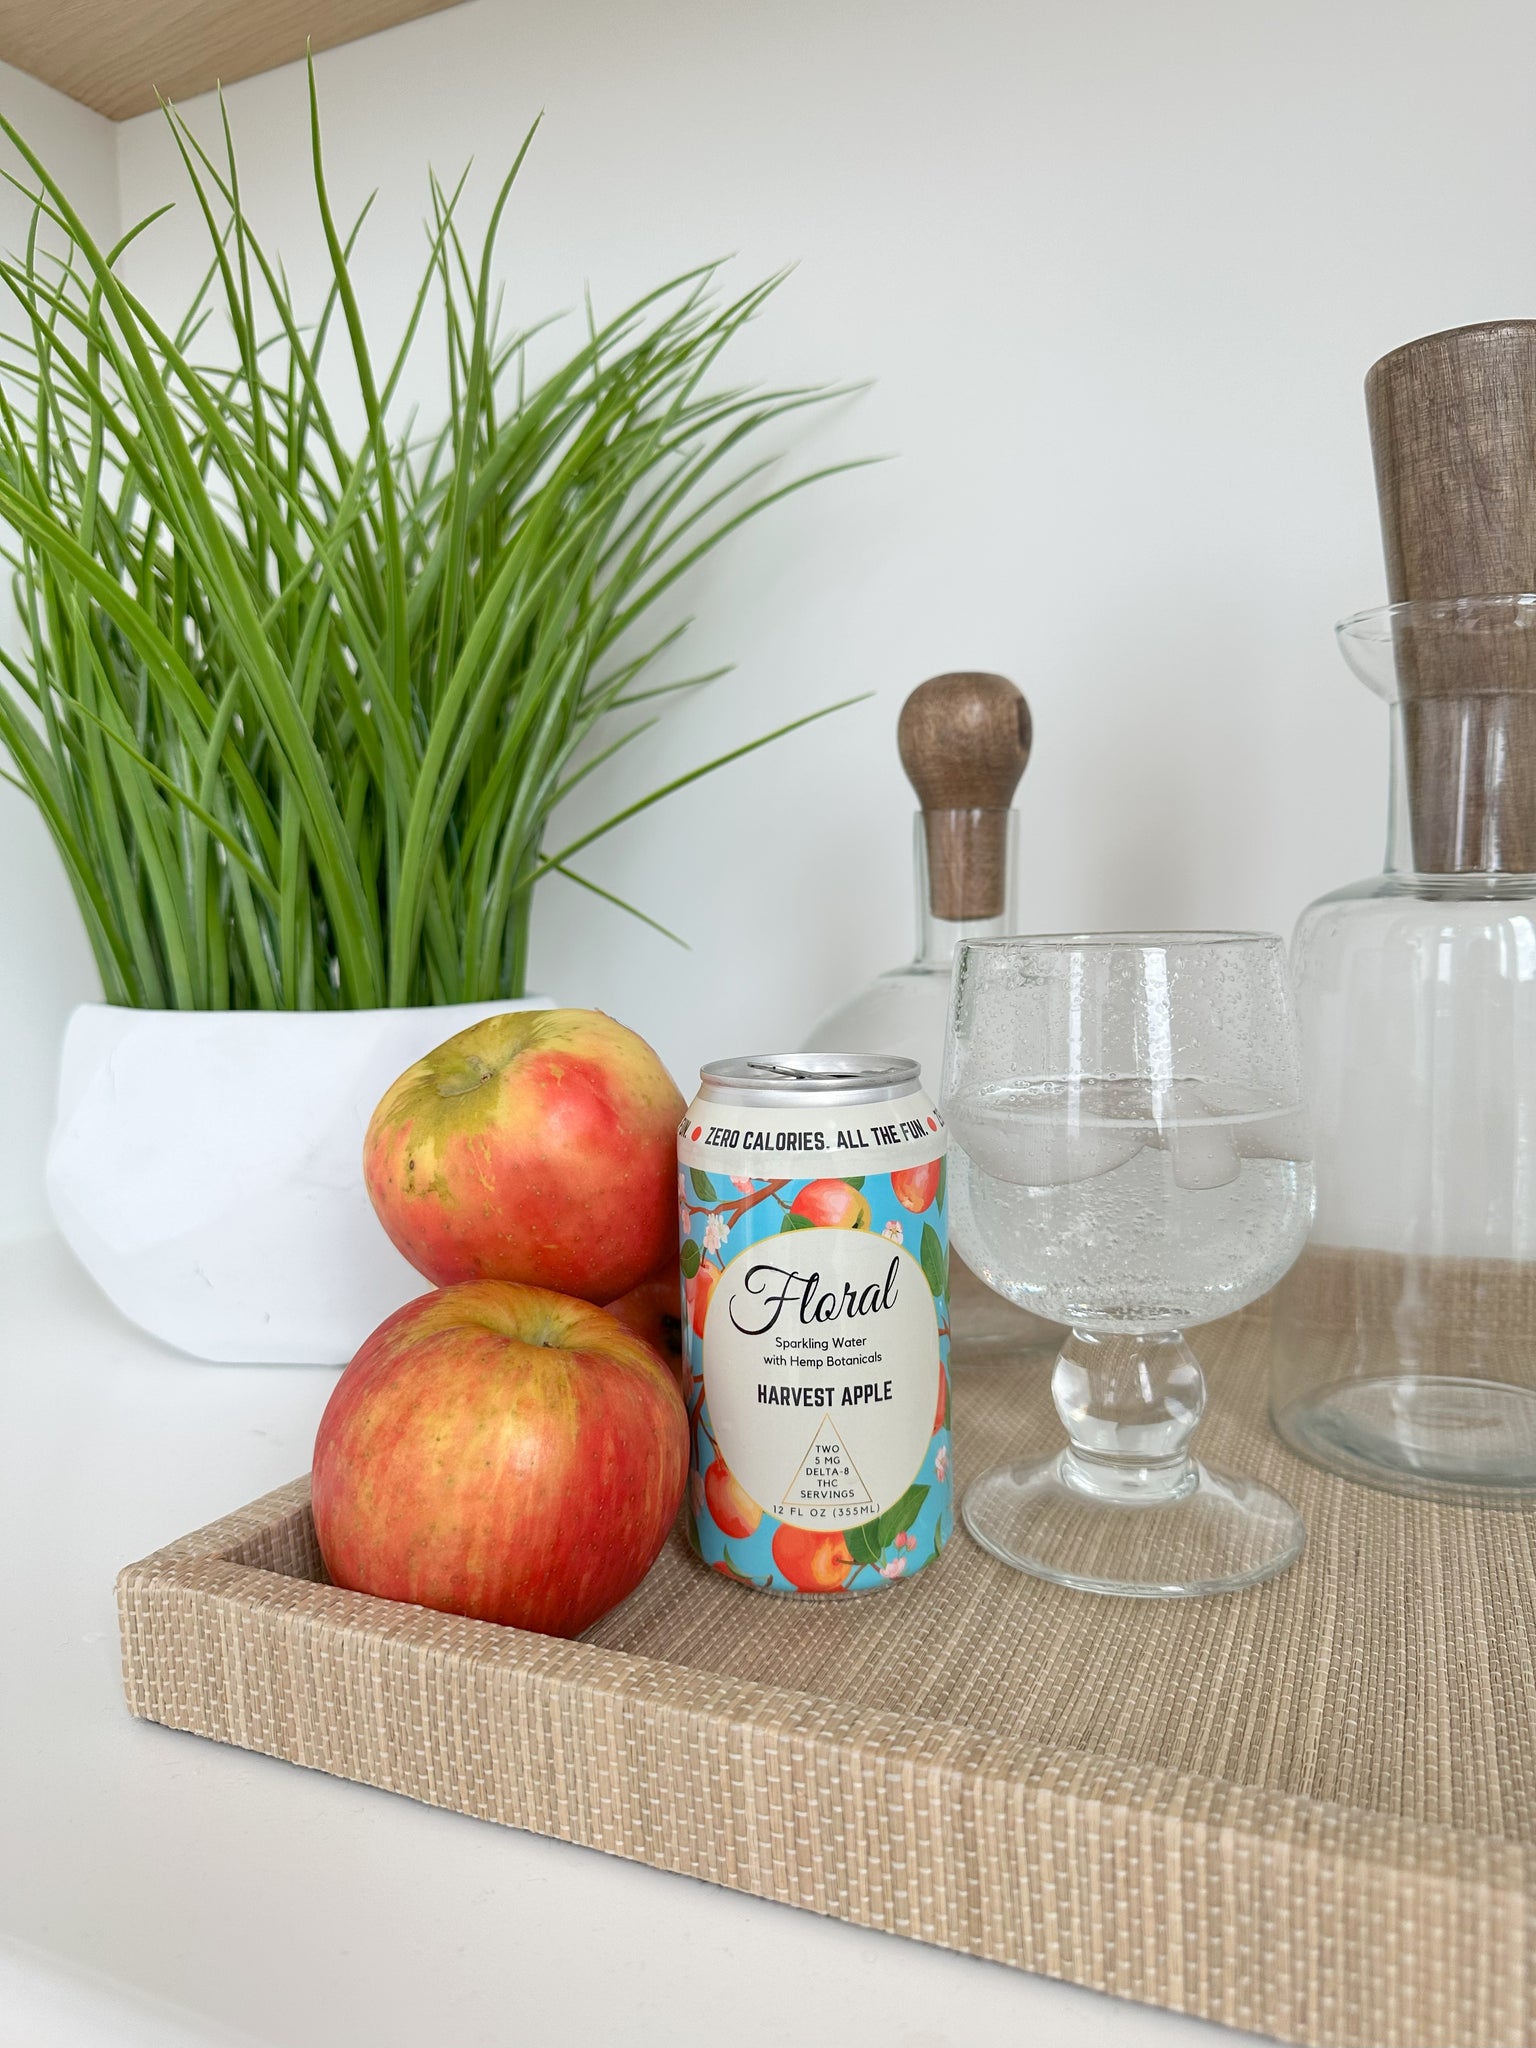 A can of Floral Beverages' Harvest Apple Sparkling Water sitting on a kitchen counter beside a cocktail glass and several apples.